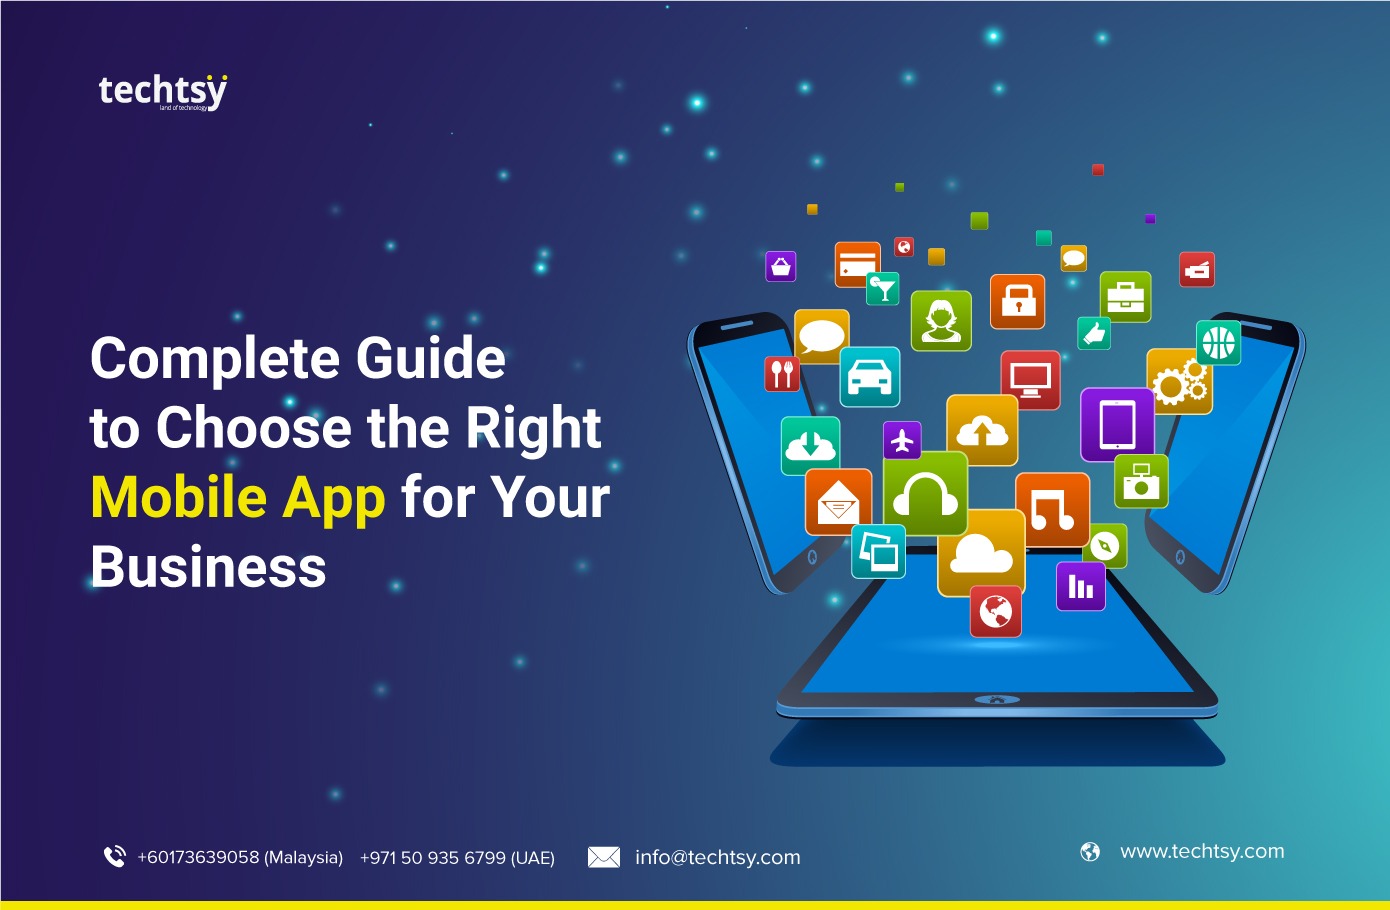 How to Choose the Right Mobile App for Your Business